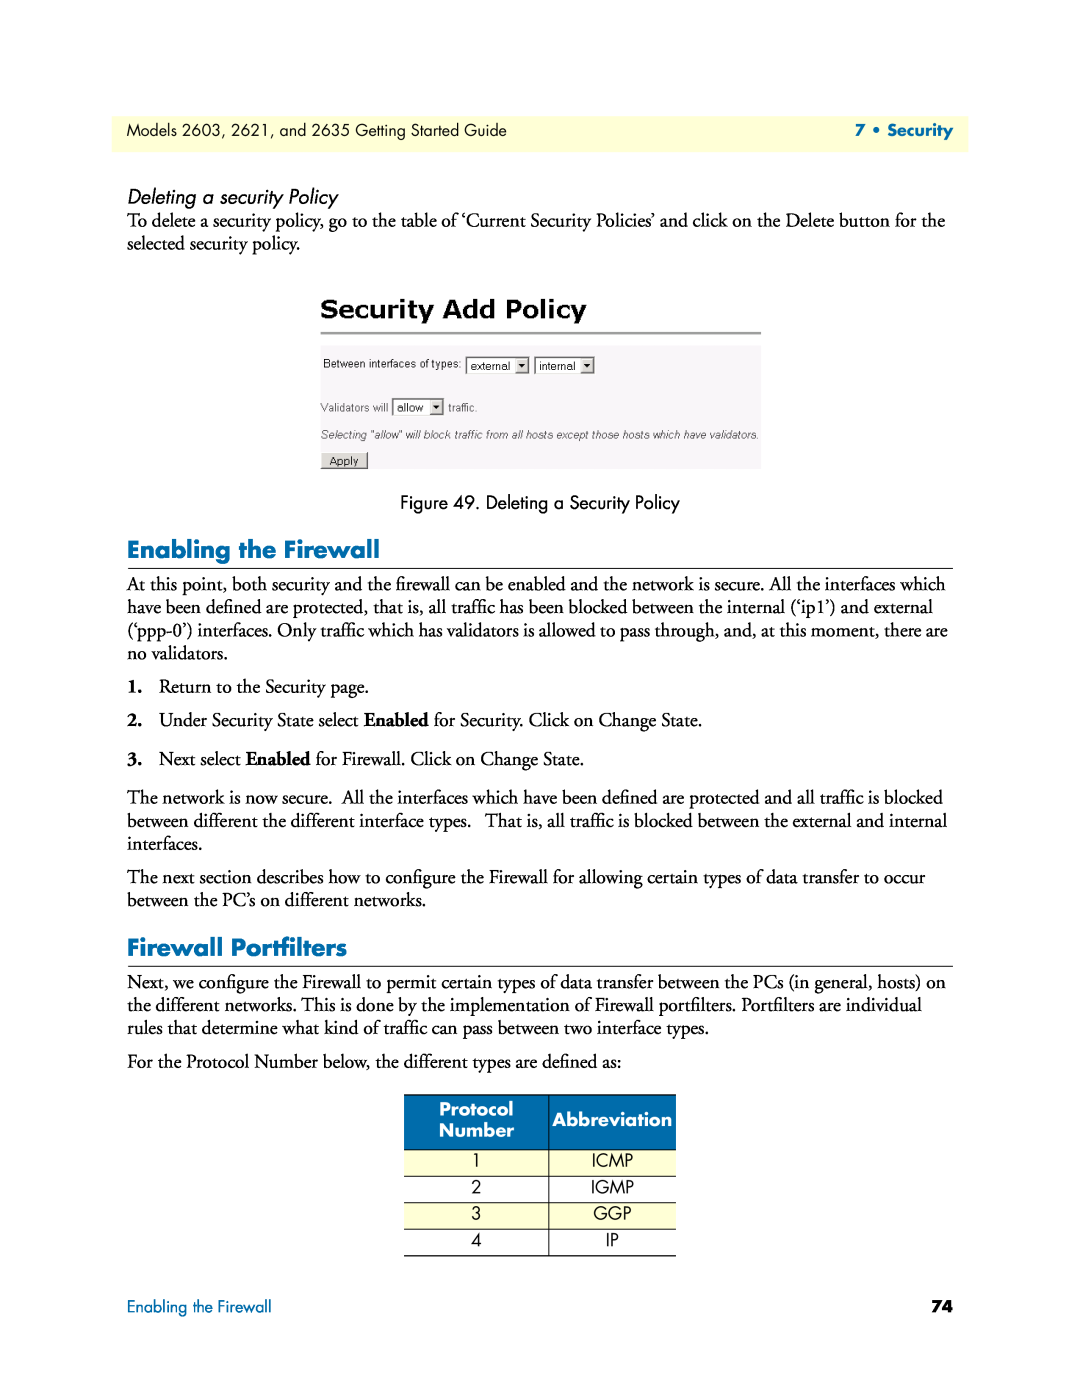 Patton electronic 2621, 2635 manual Enabling the Firewall, Firewall Portﬁlters, Deleting a security Policy 